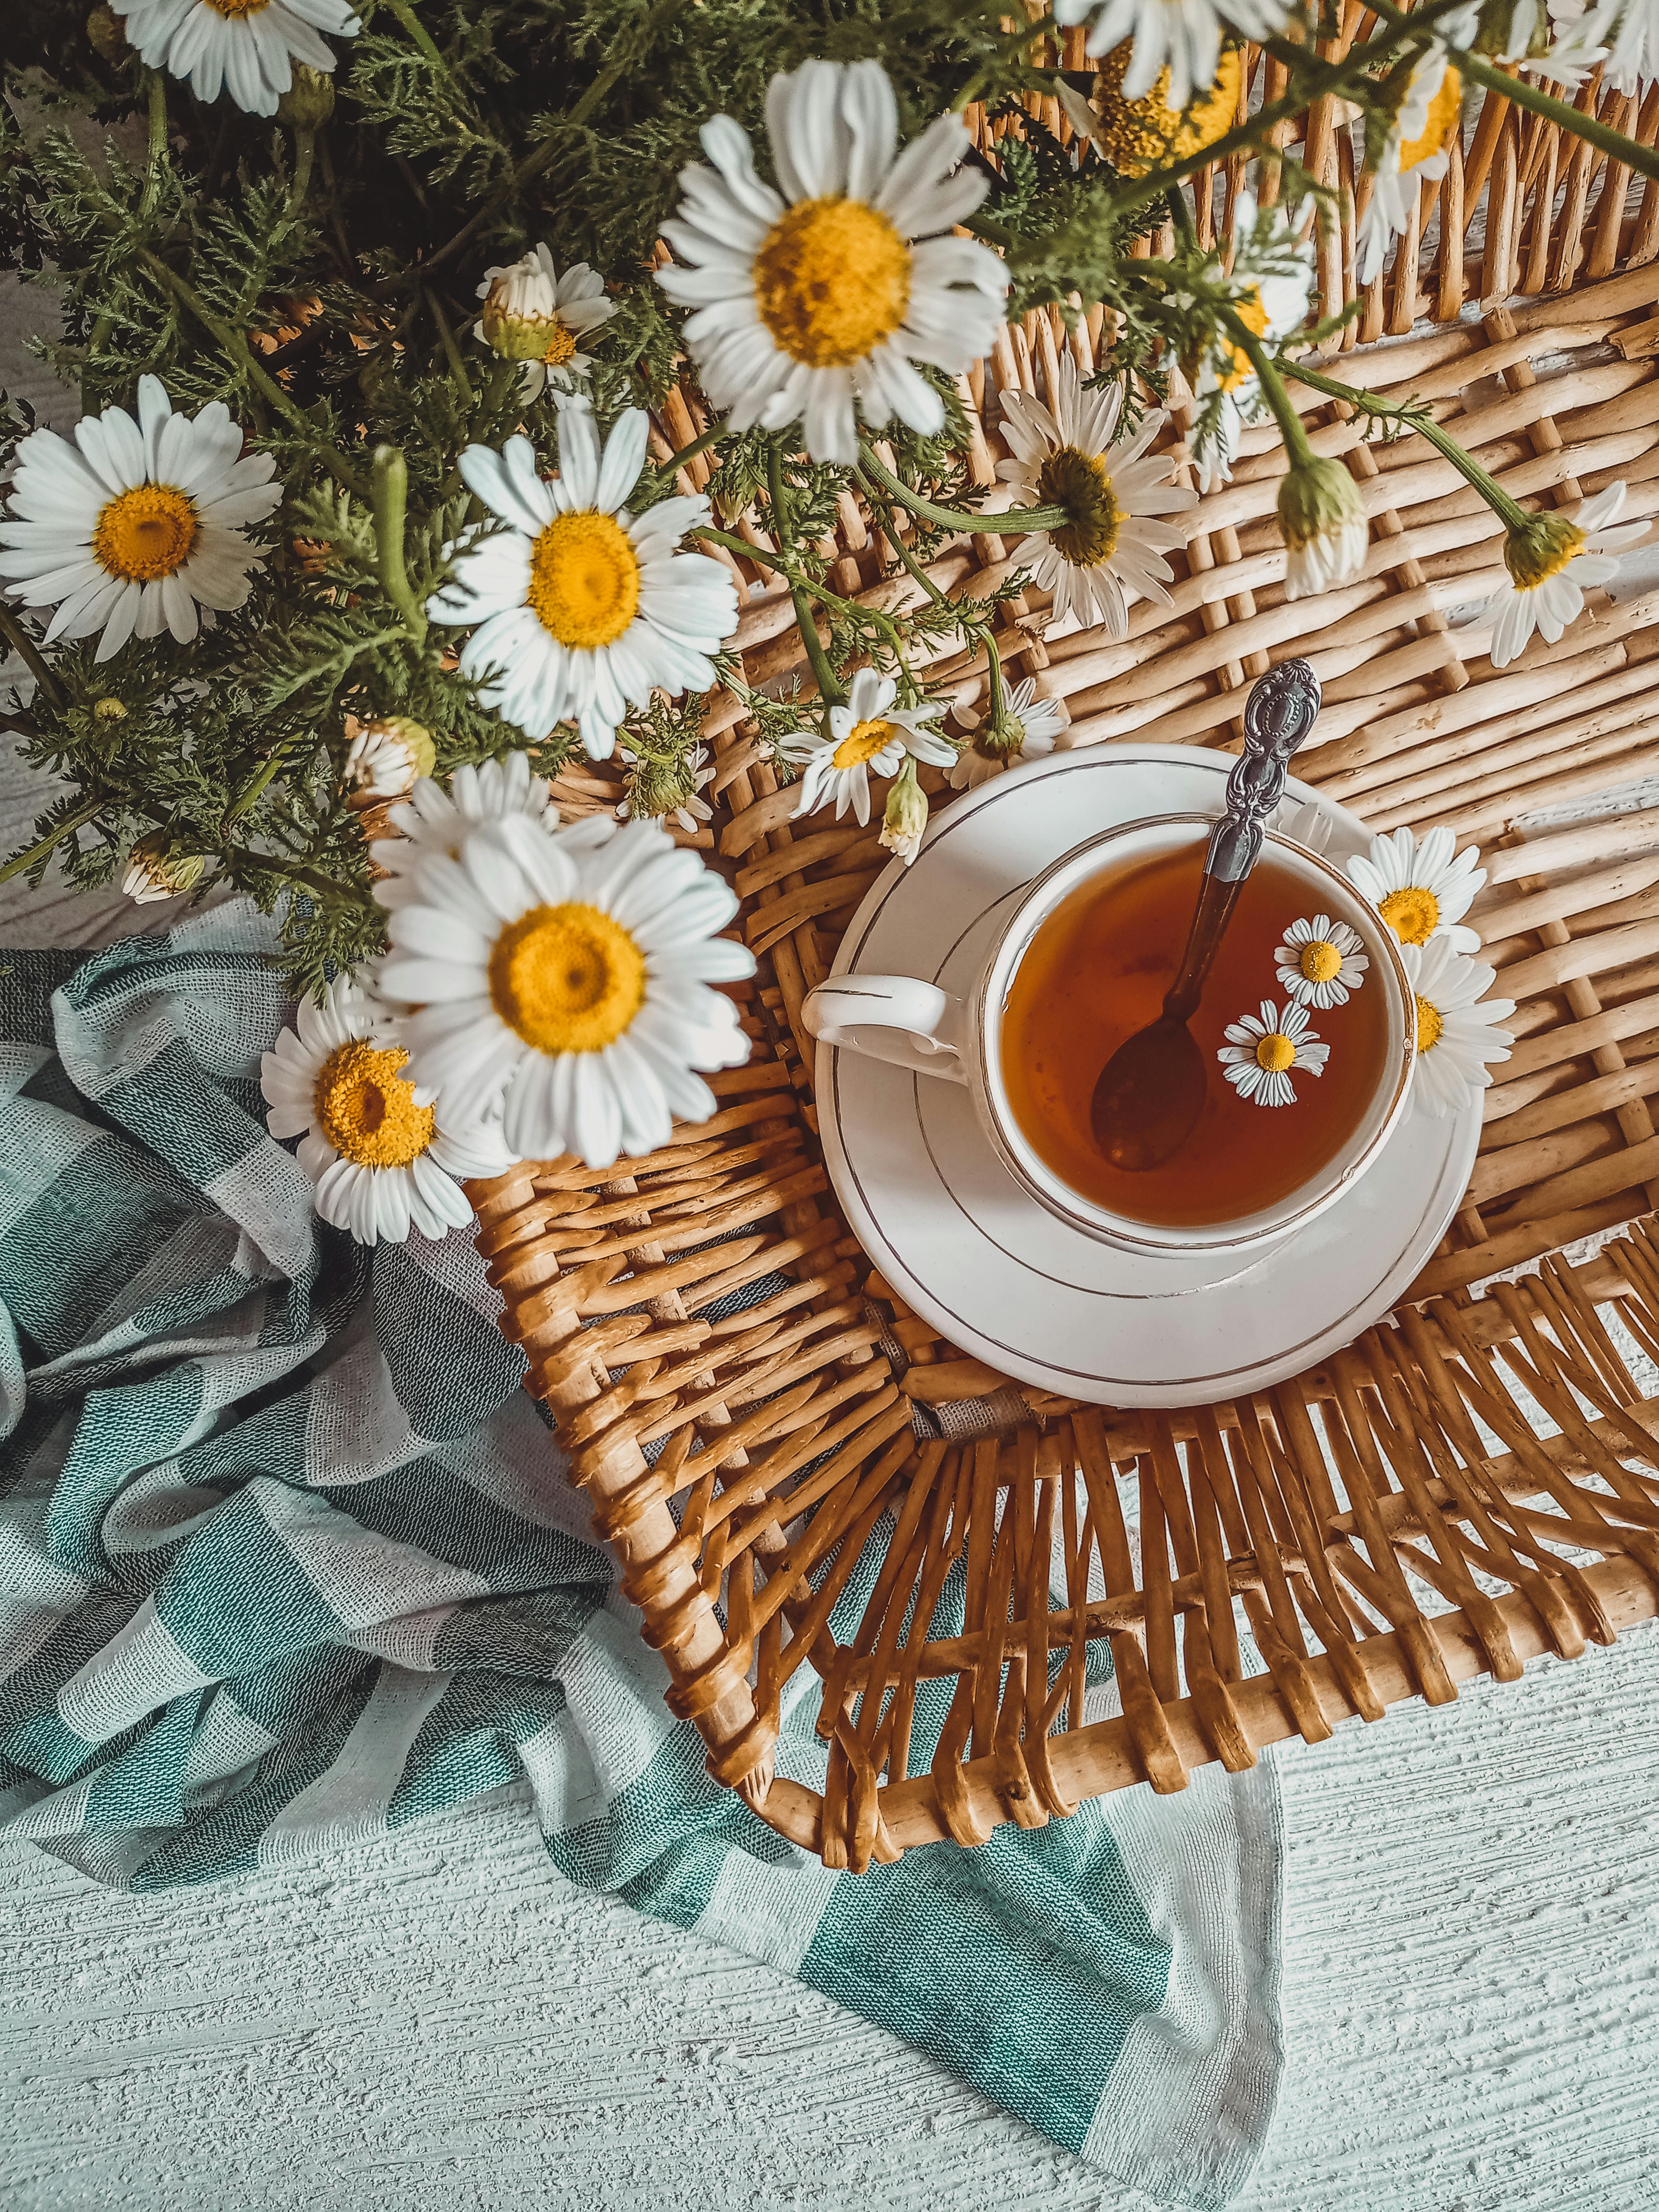 chamomile flowers and a cup of tea